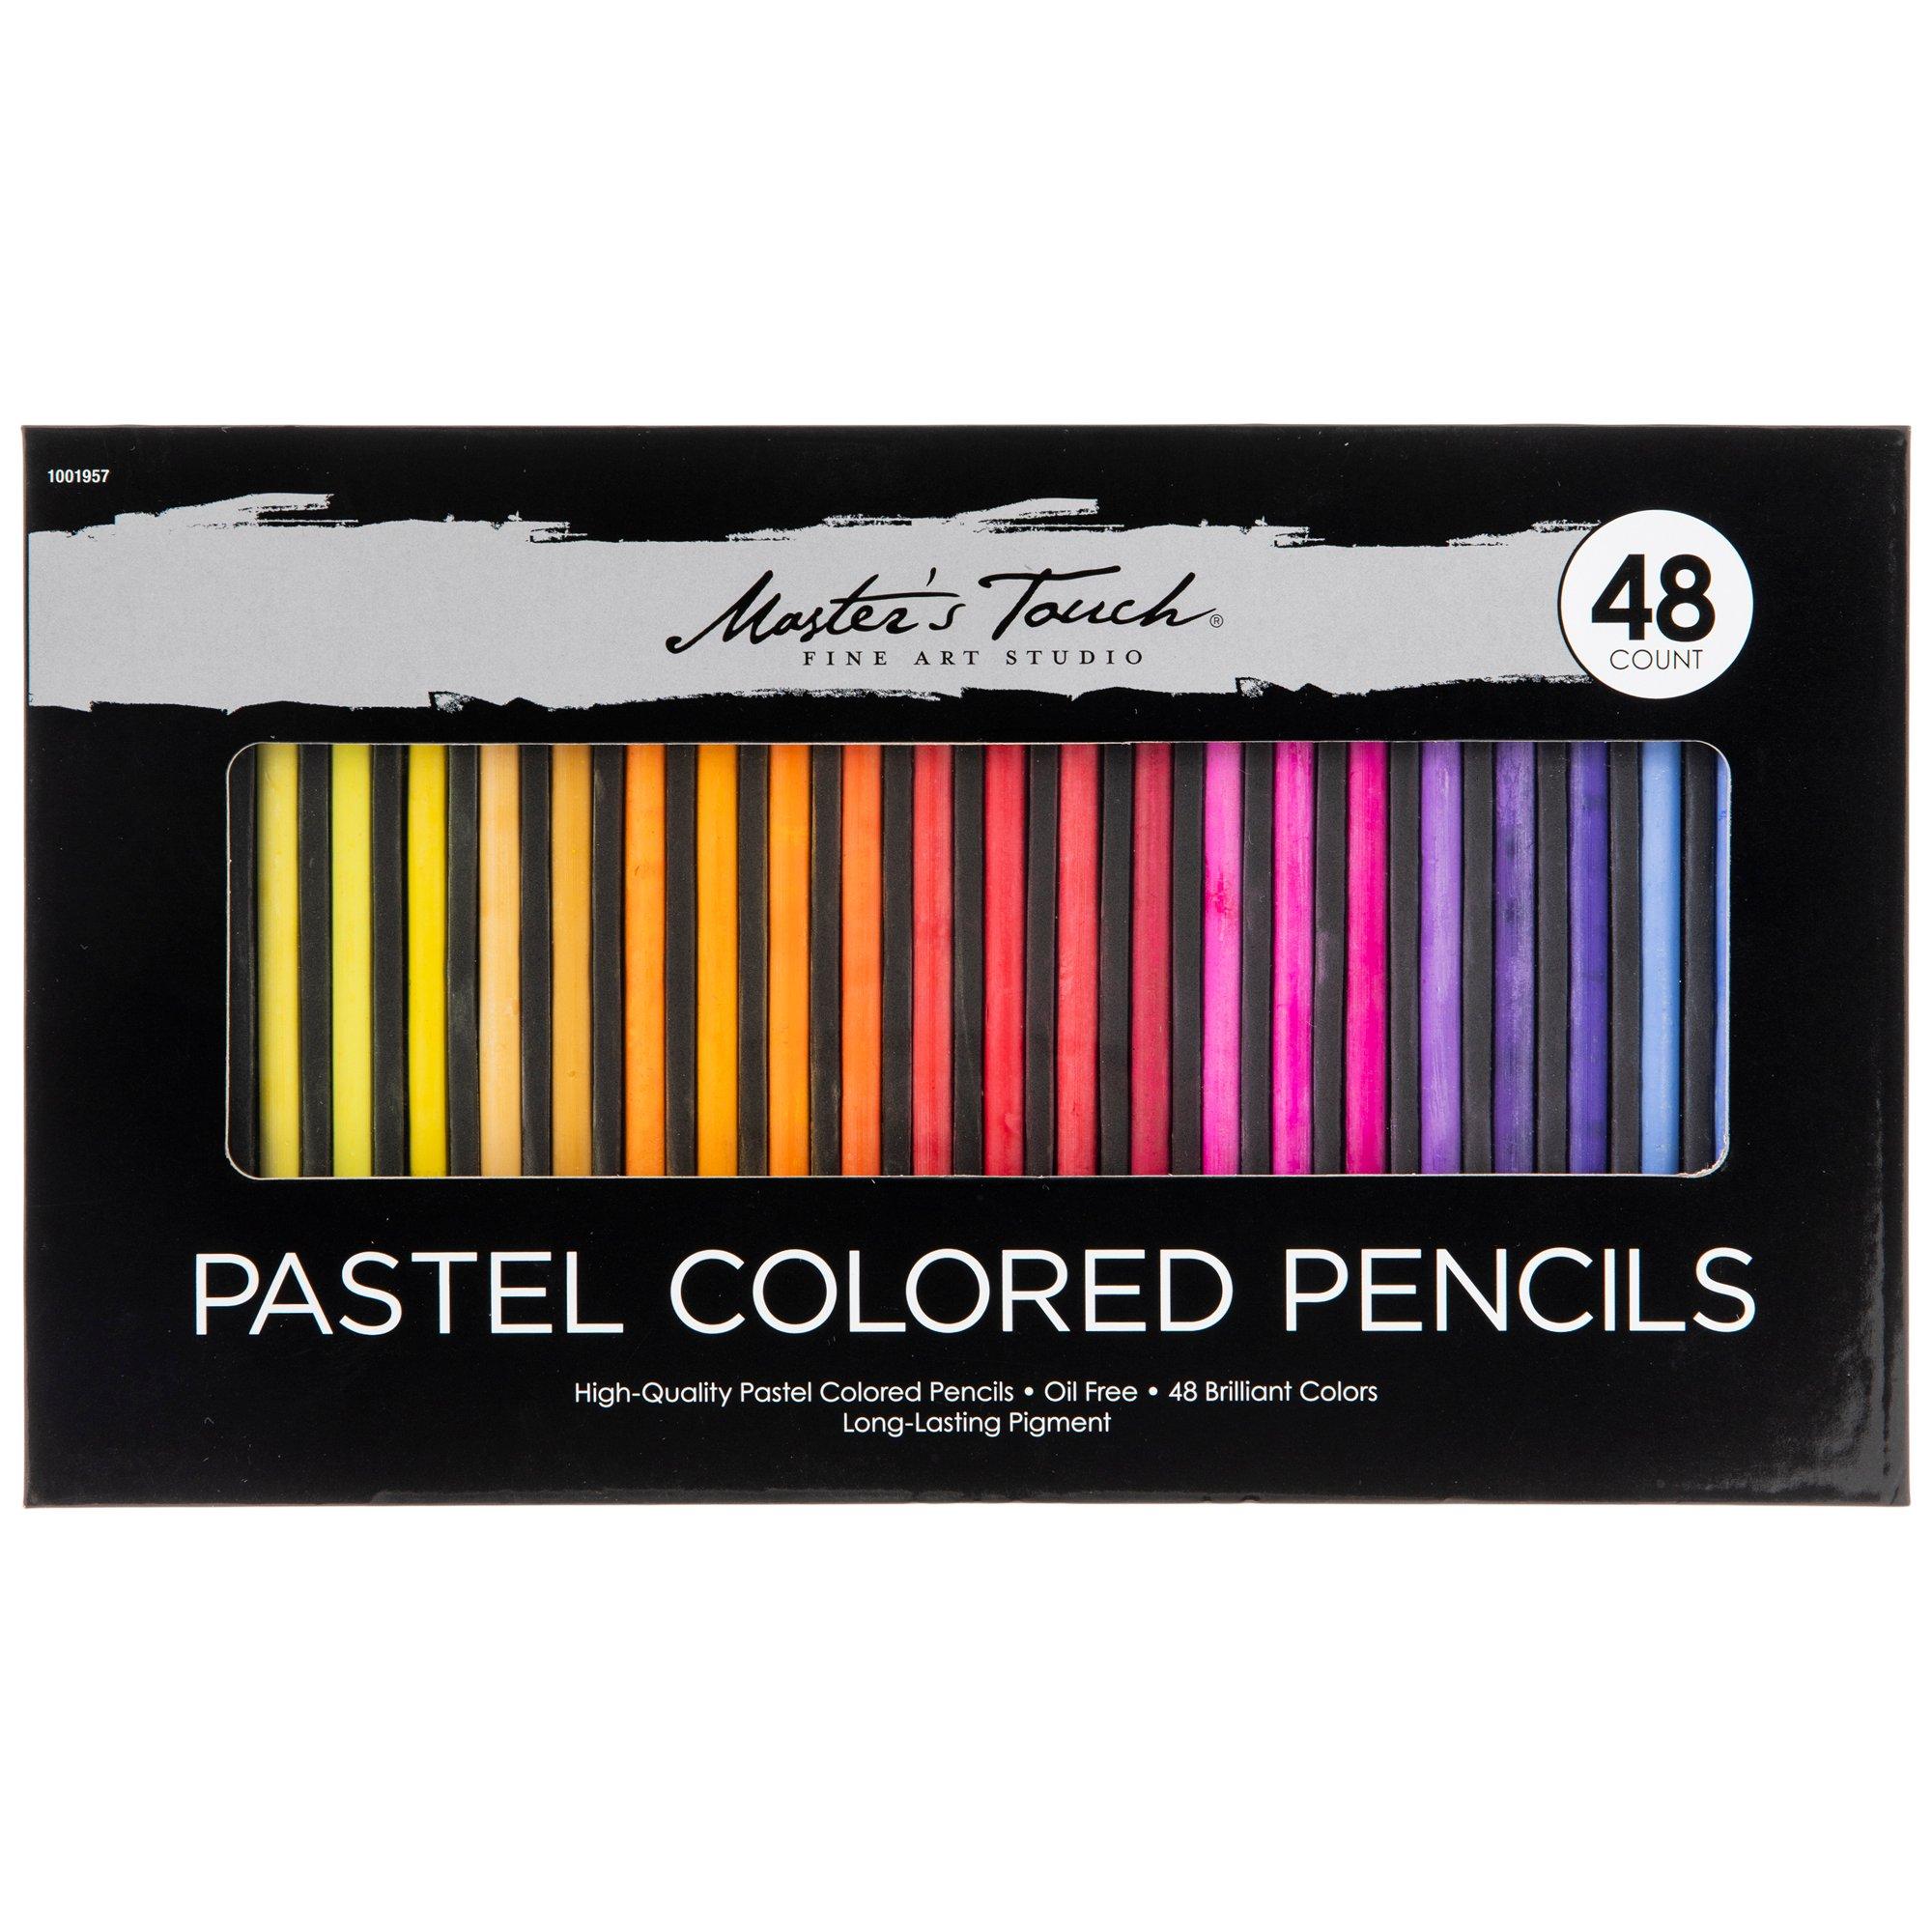 Master's Touch Pastel Colored Pencils - 48 Piece Set, Hobby Lobby